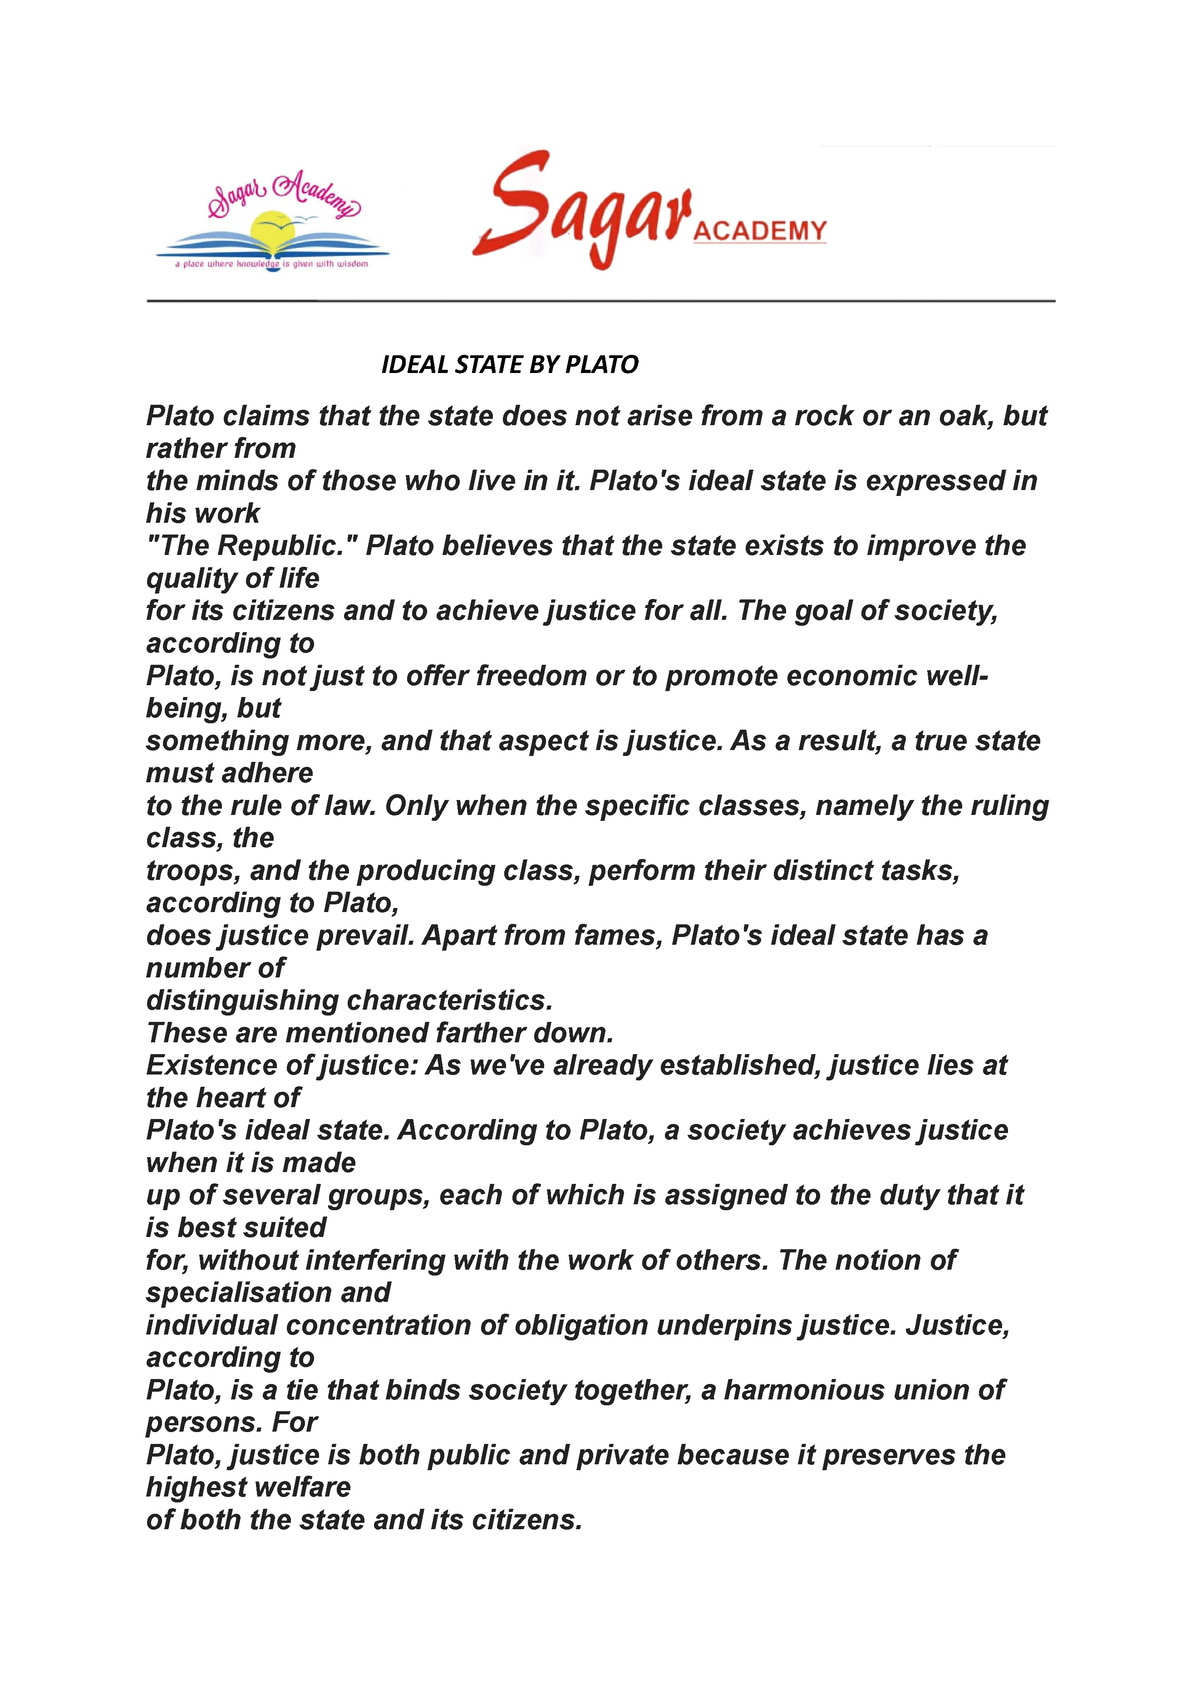 essay on plato's ideal state